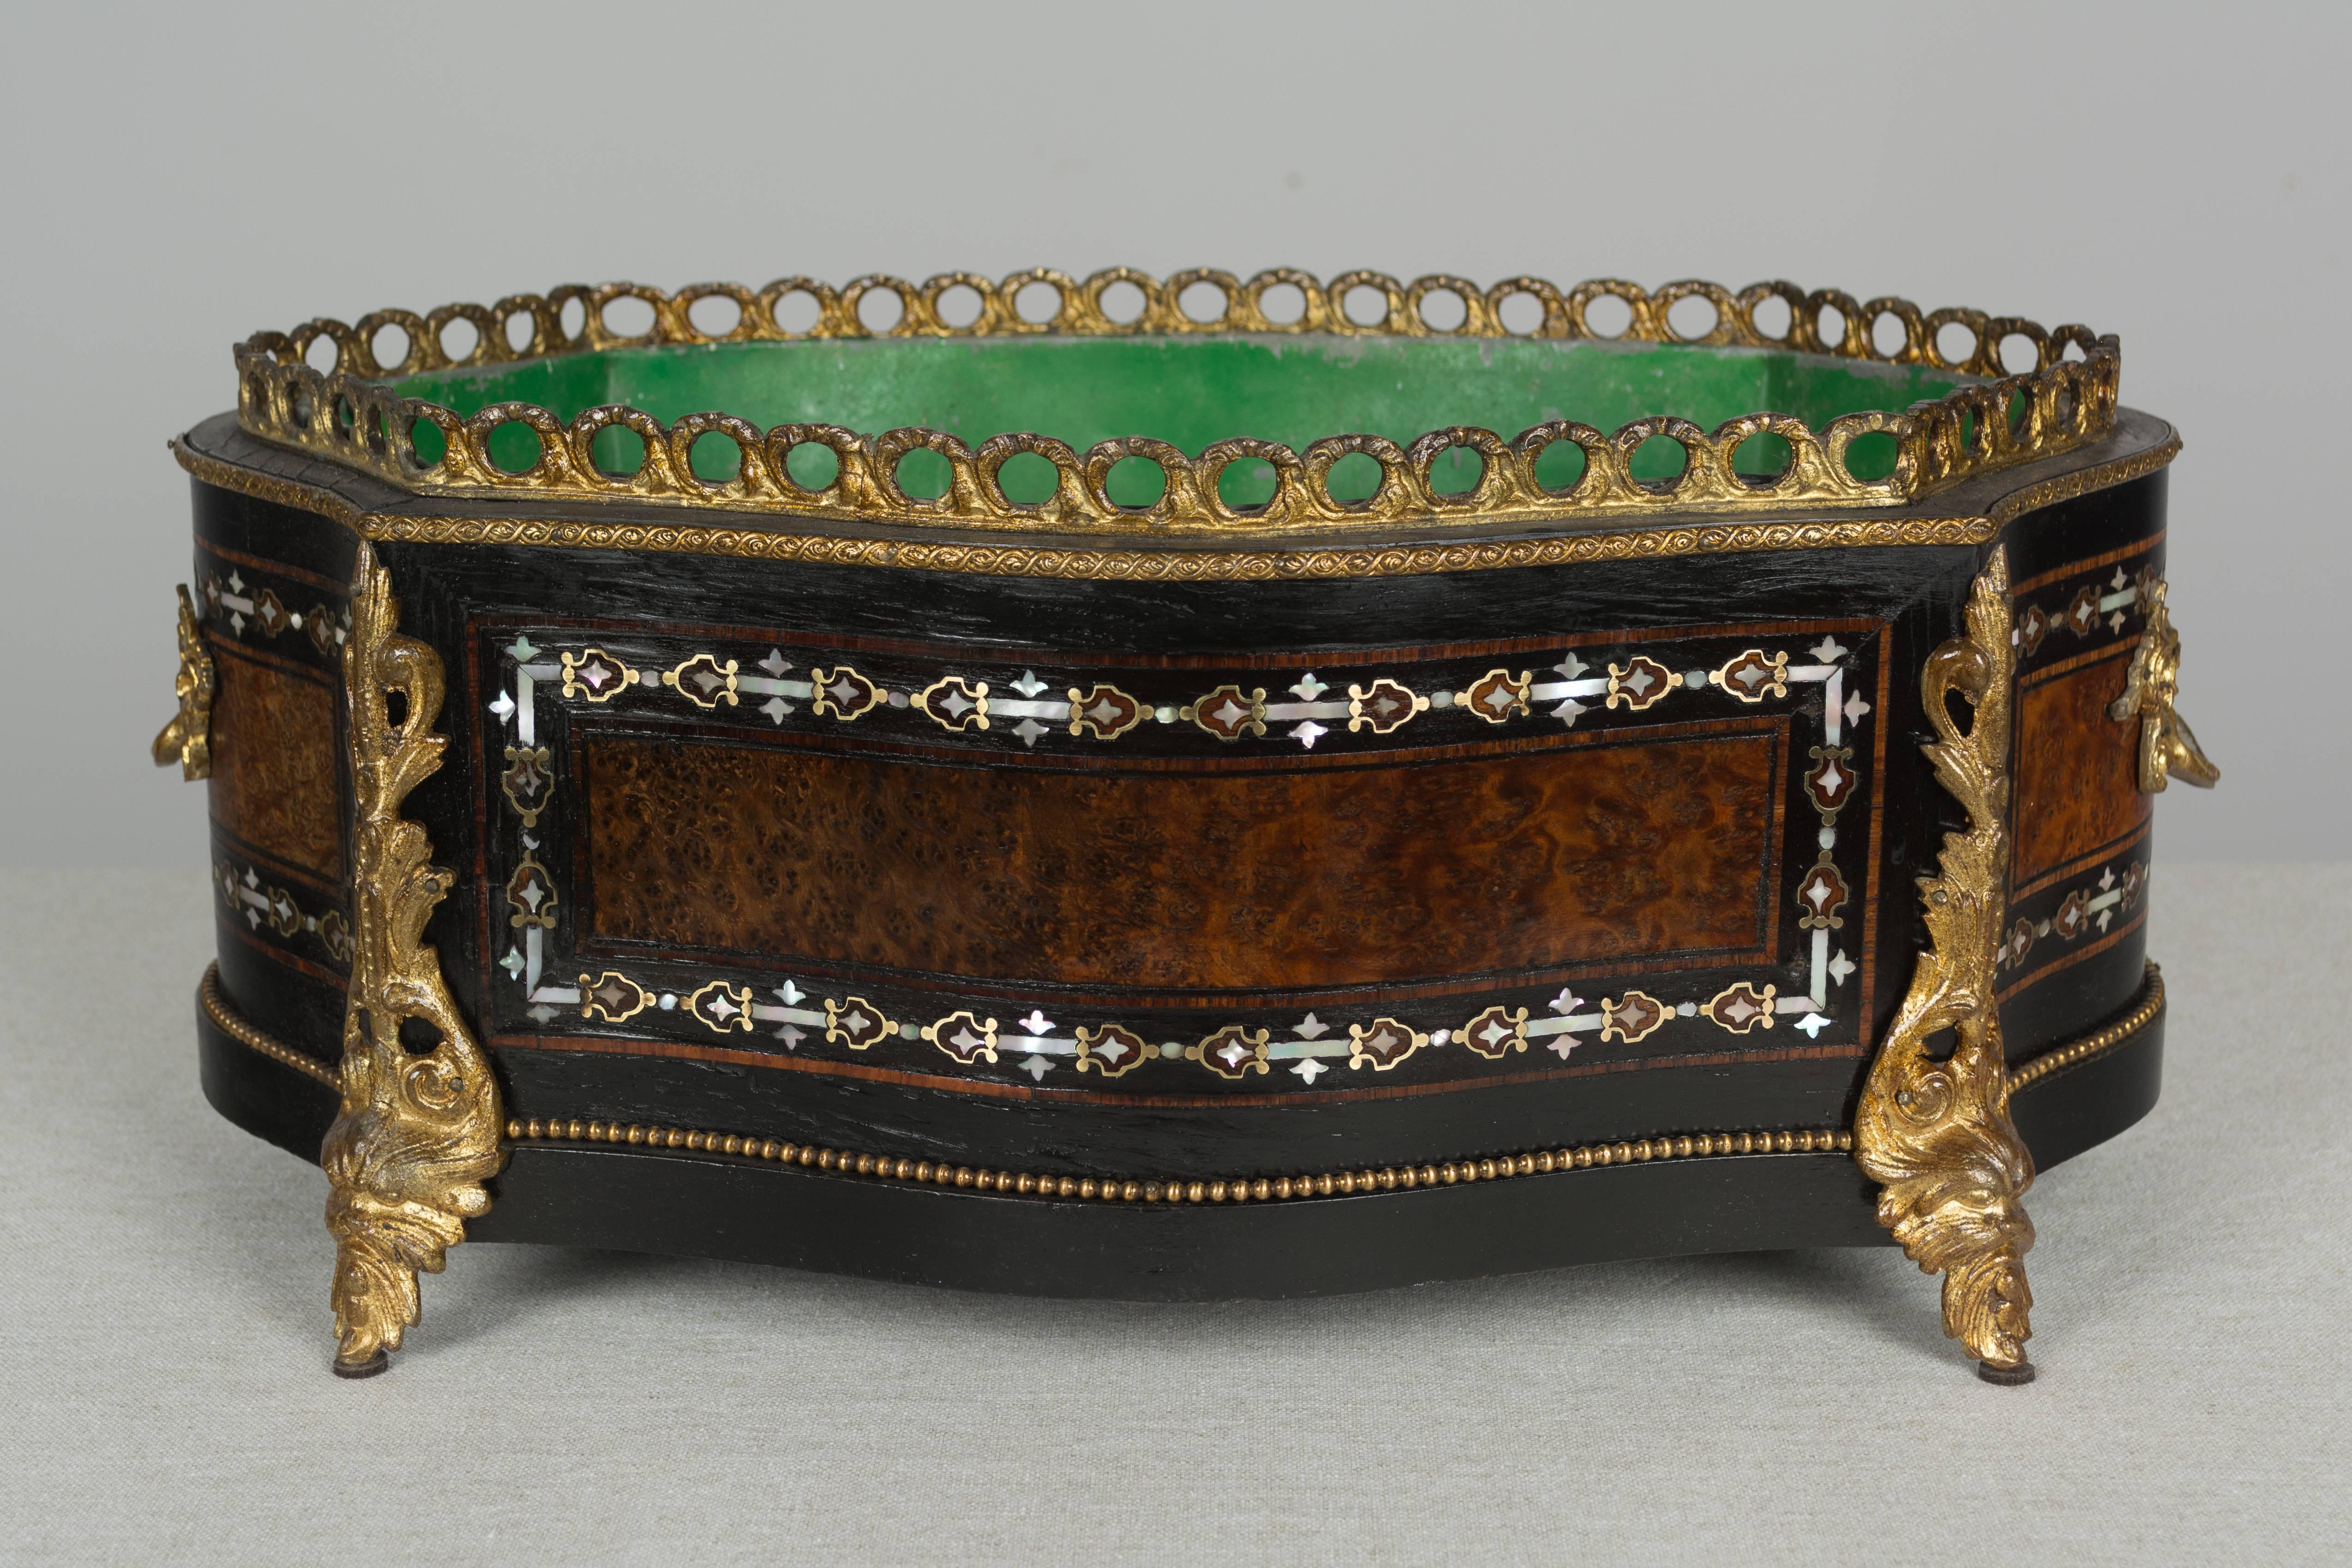 A fine 19th century Napoleon III marquetry jardiniere with mother of pearl inlay, ebonized wood and burl of elm veneer. Bronze mounted with two handles, gallery and corner ornaments. Removable zinc liner with green painted interior. A beautiful